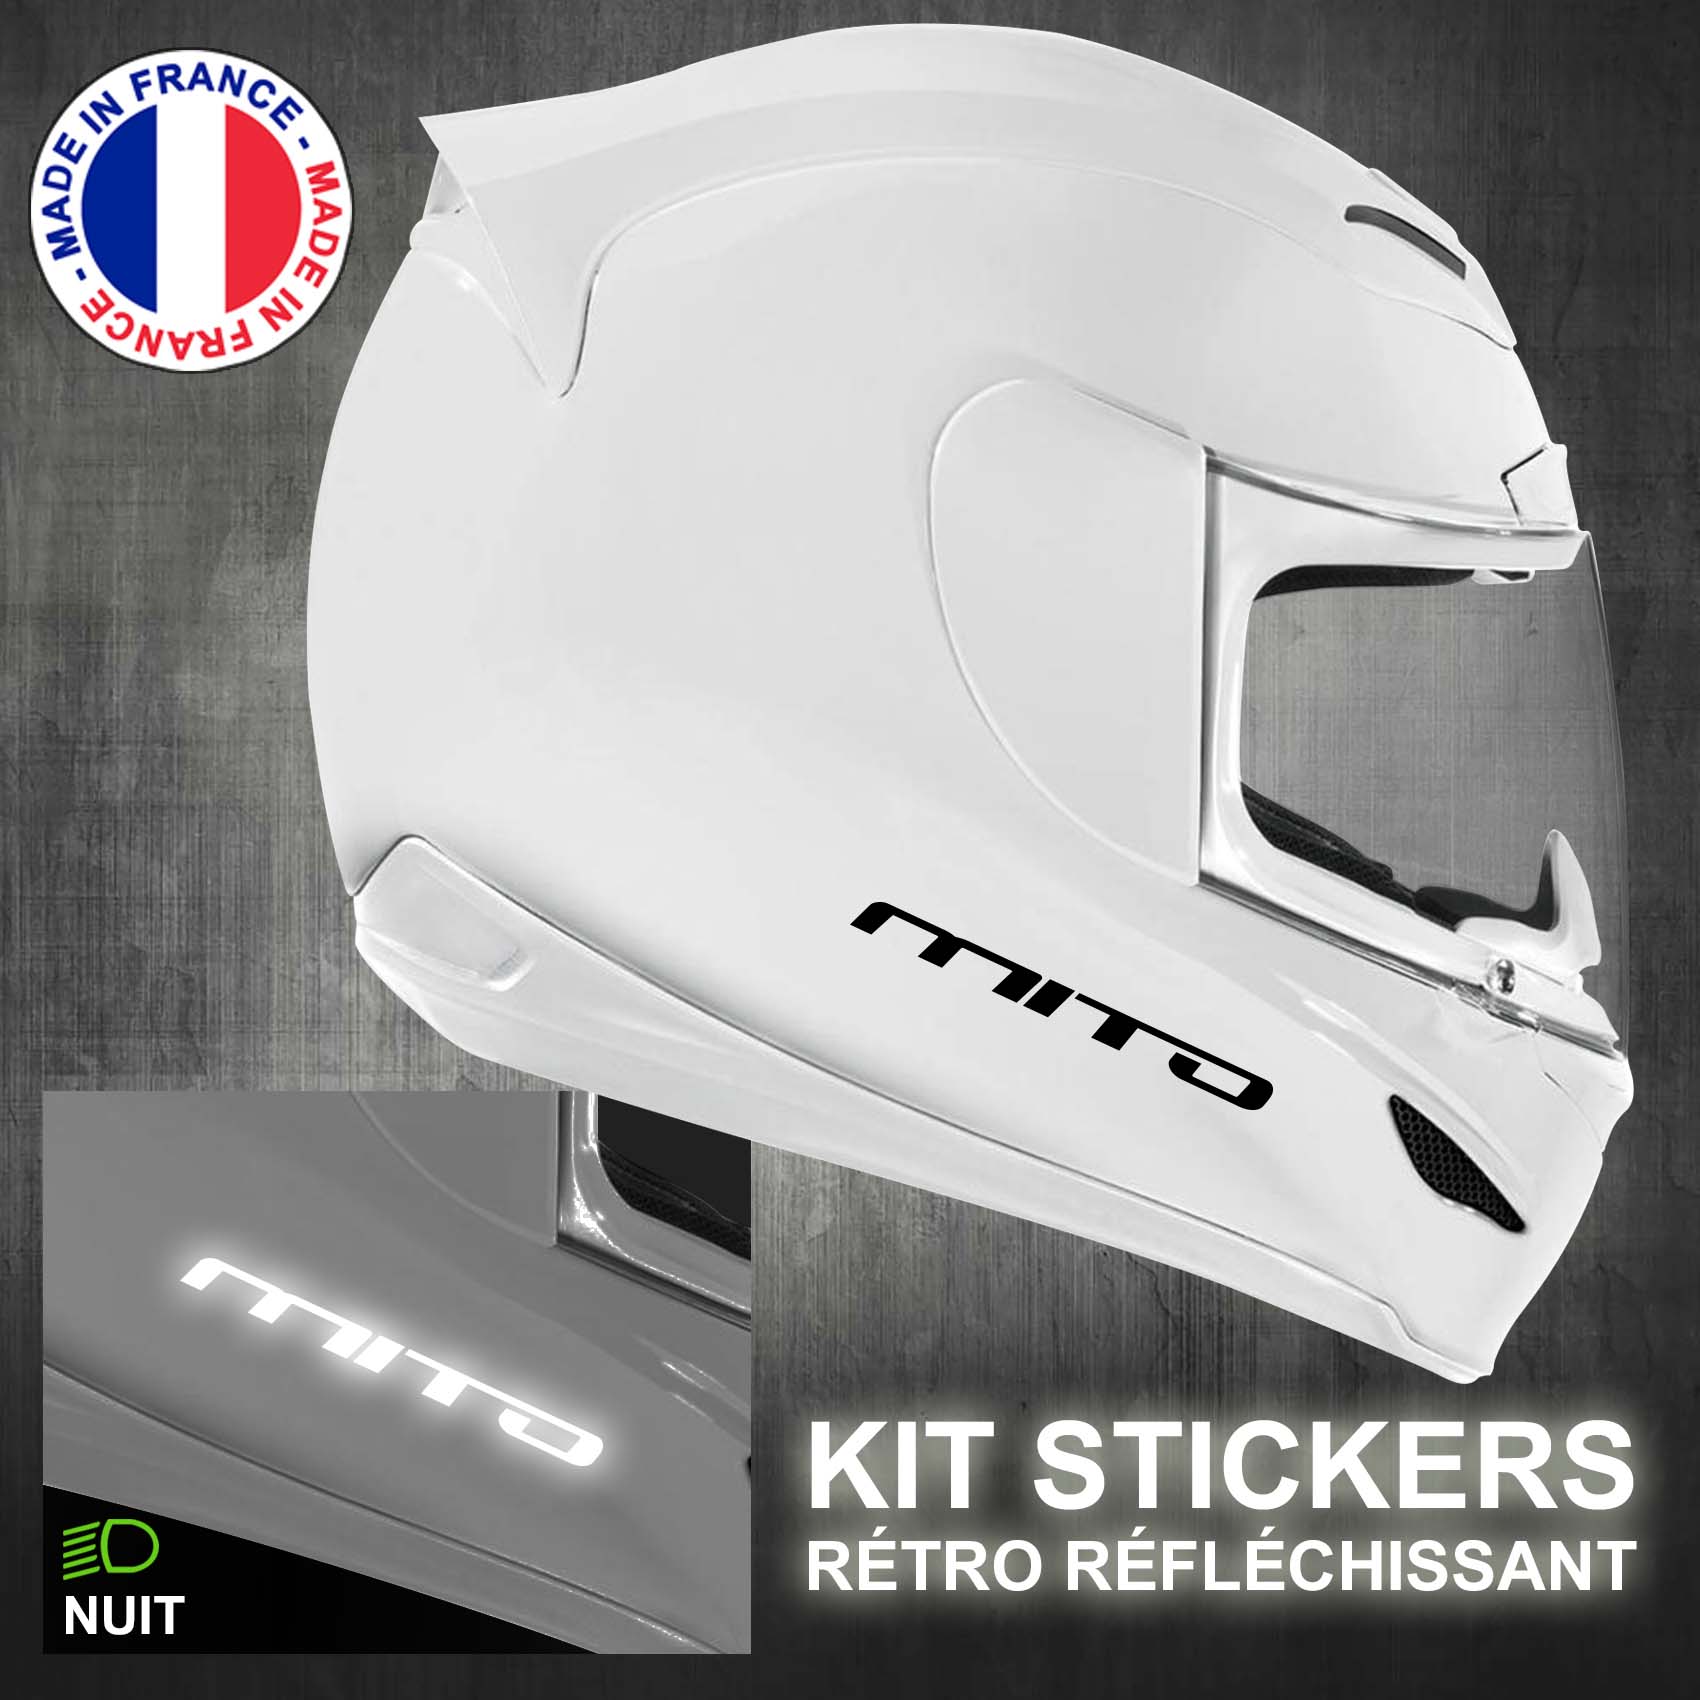 stickers-casque-moto-cagiva-mito-ref4-retro-reflechissant-autocollant-blanc-moto-velo-tuning-racing-route-sticker-casques-adhesif-scooter-nuit-securite-decals-personnalise-personnalisable-min